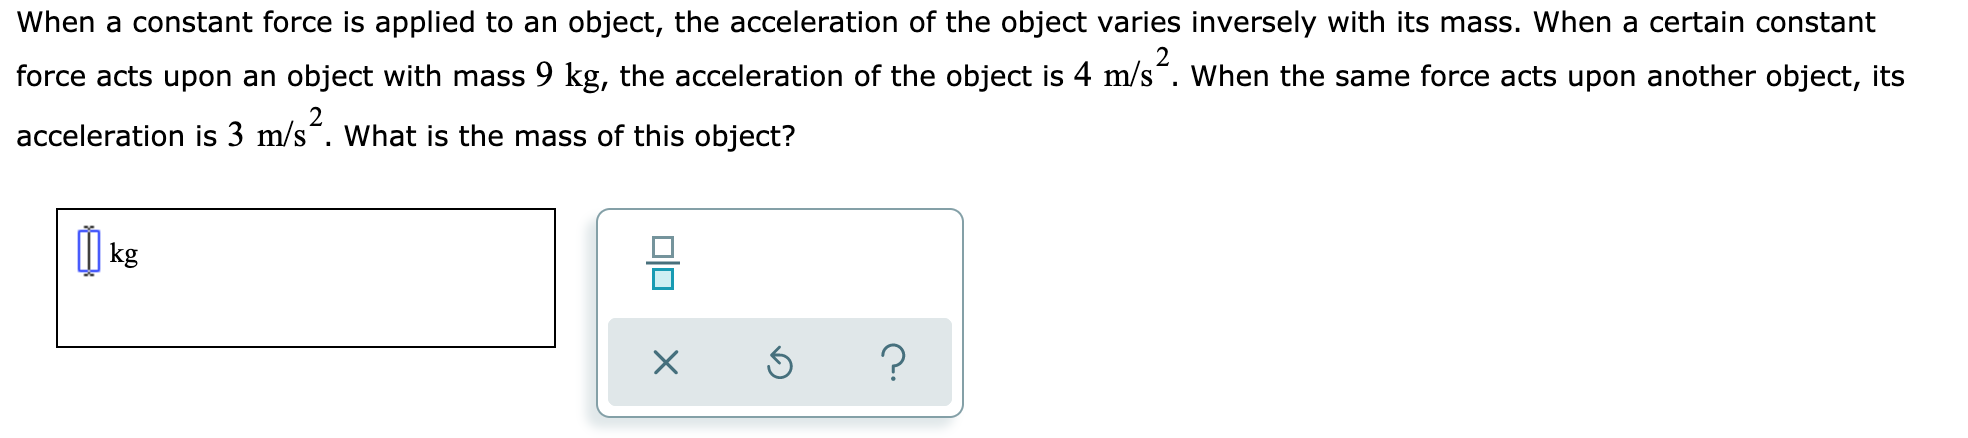 When a constant force is applied to an object, the acceleration of the object varies inversely with its mass. When a certain constant
force acts upon an object with mass 9 kg, the acceleration of the object is 4 m/s". When the same force acts upon another object, its
acceleration is 3 m/s“. What is the mass of this object?
I| kg
